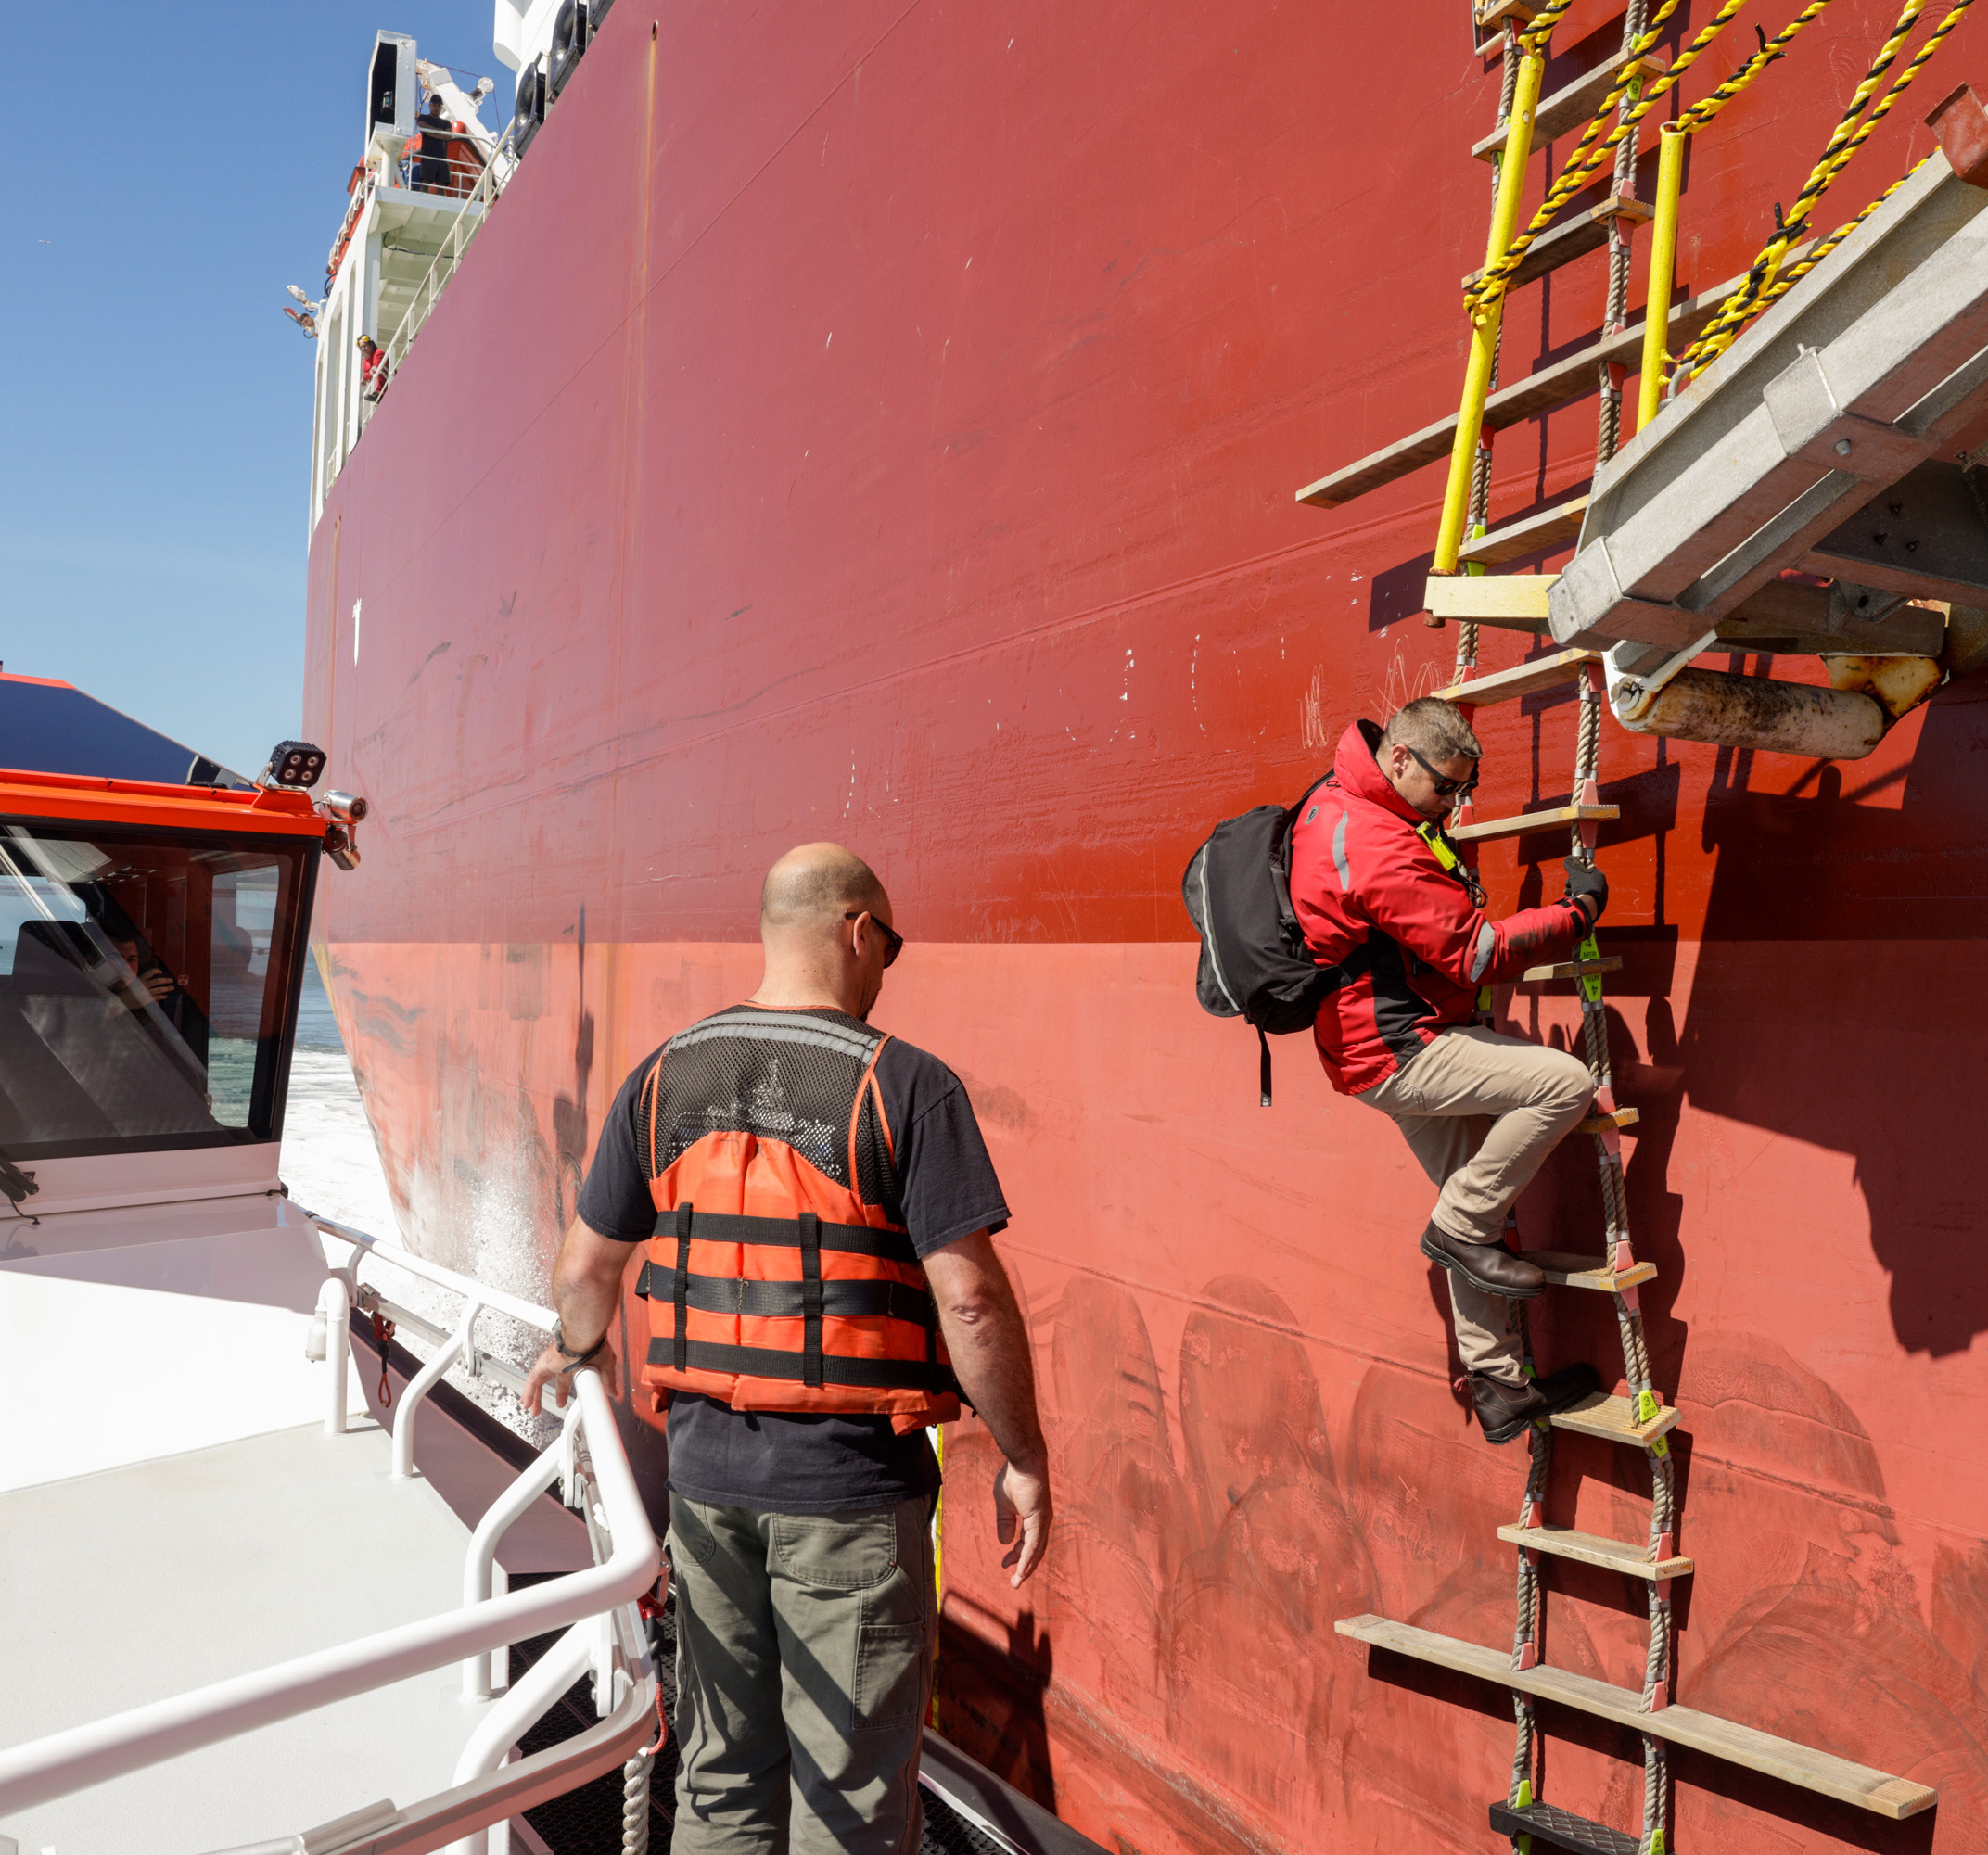 A person in a red jacket climbs a rope ladder onto a large red ship; another person watches from a smaller vessel.